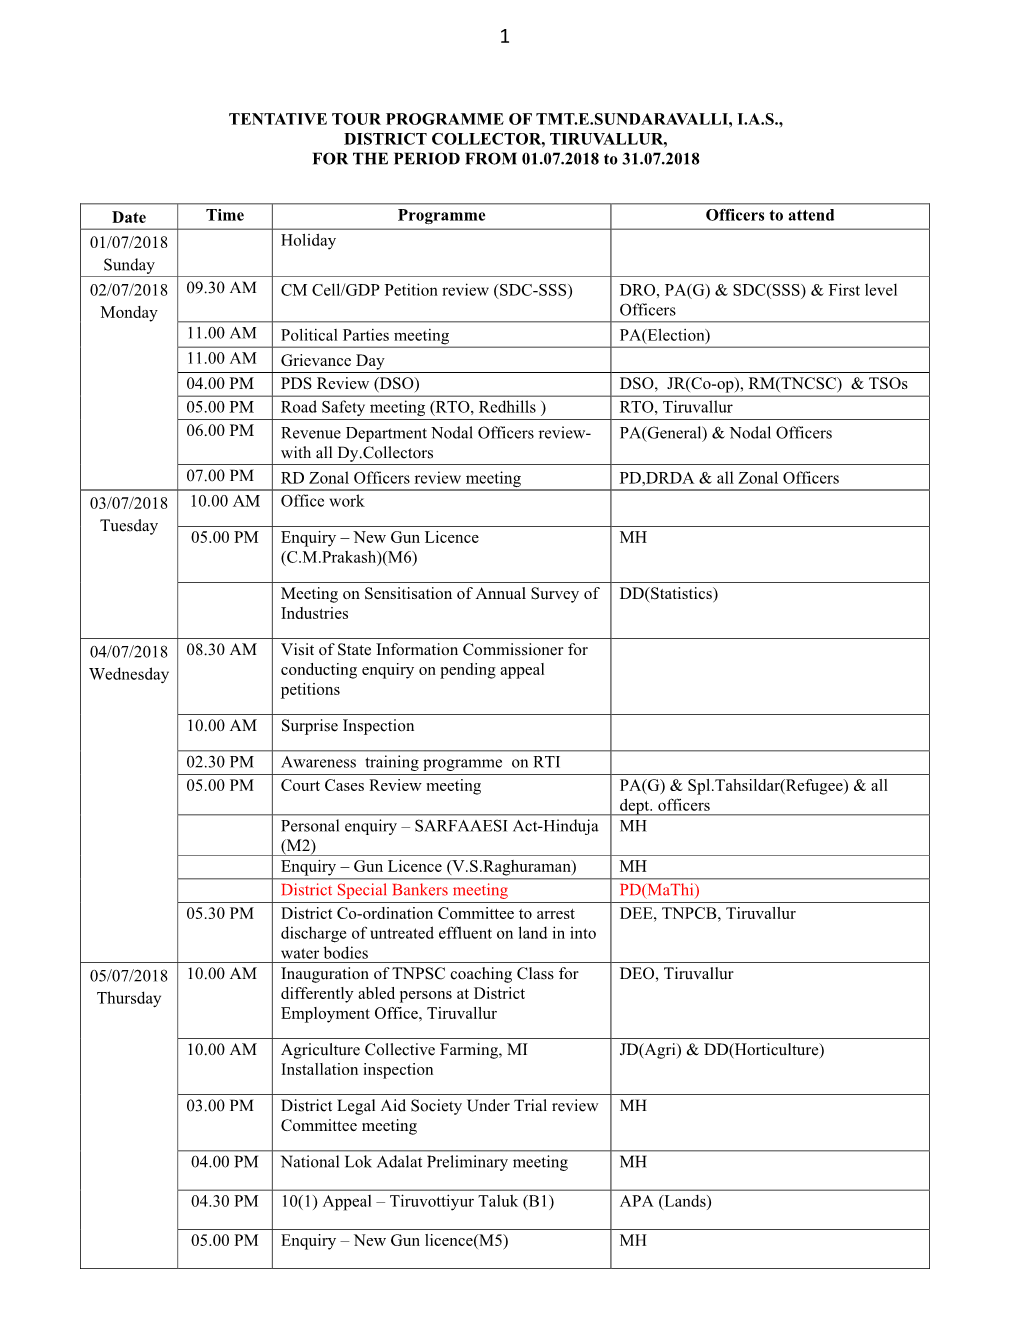 TENTATIVE TOUR PROGRAMME of TMT.E.SUNDARAVALLI, I.A.S., DISTRICT COLLECTOR, TIRUVALLUR, for the PERIOD from 01.07.2018 to 31.07.2018